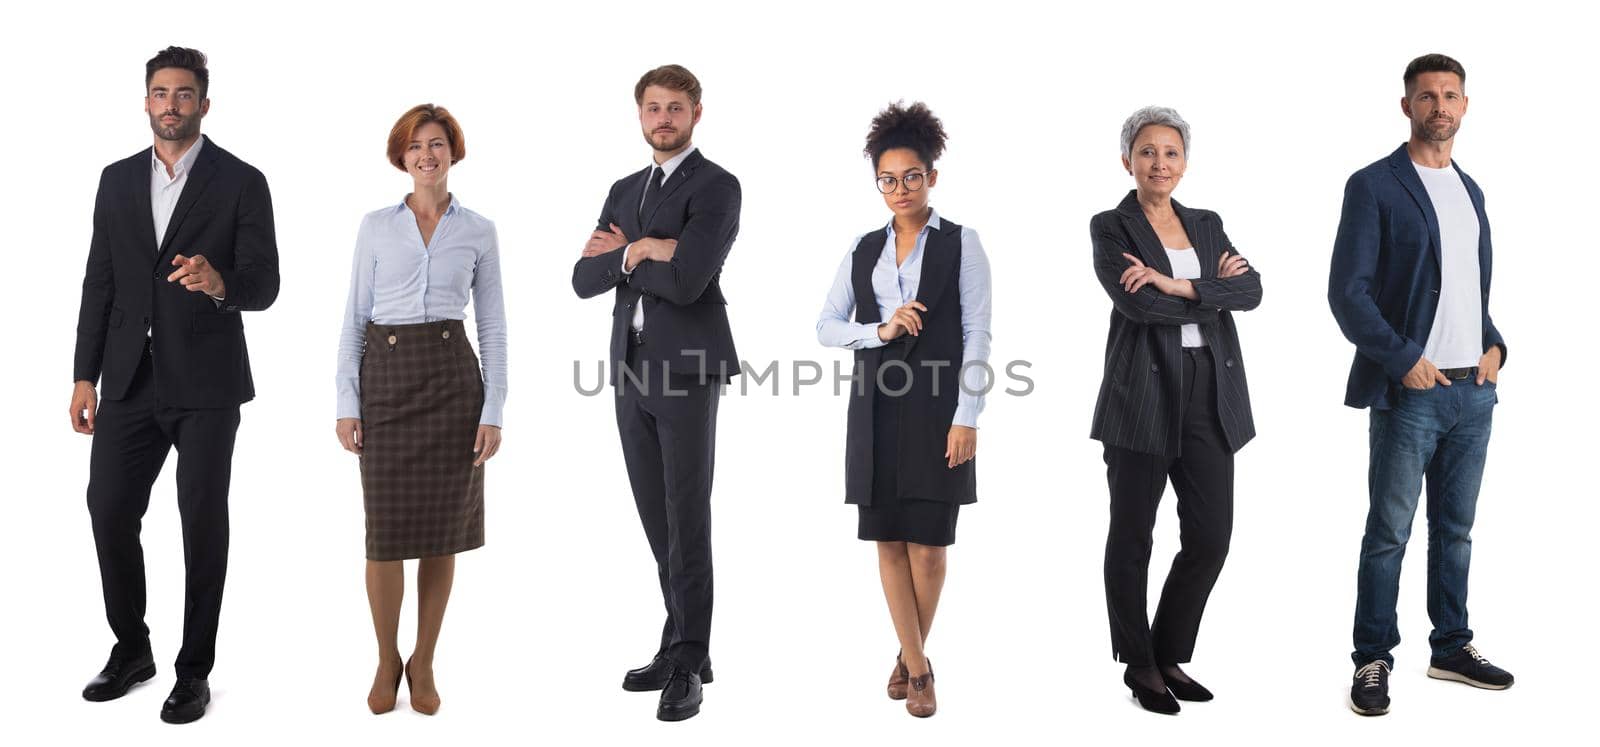 Successful business team. Full length portrait of group of confident business people showing thumbs up and smiling. Design element, studio isolated on white background